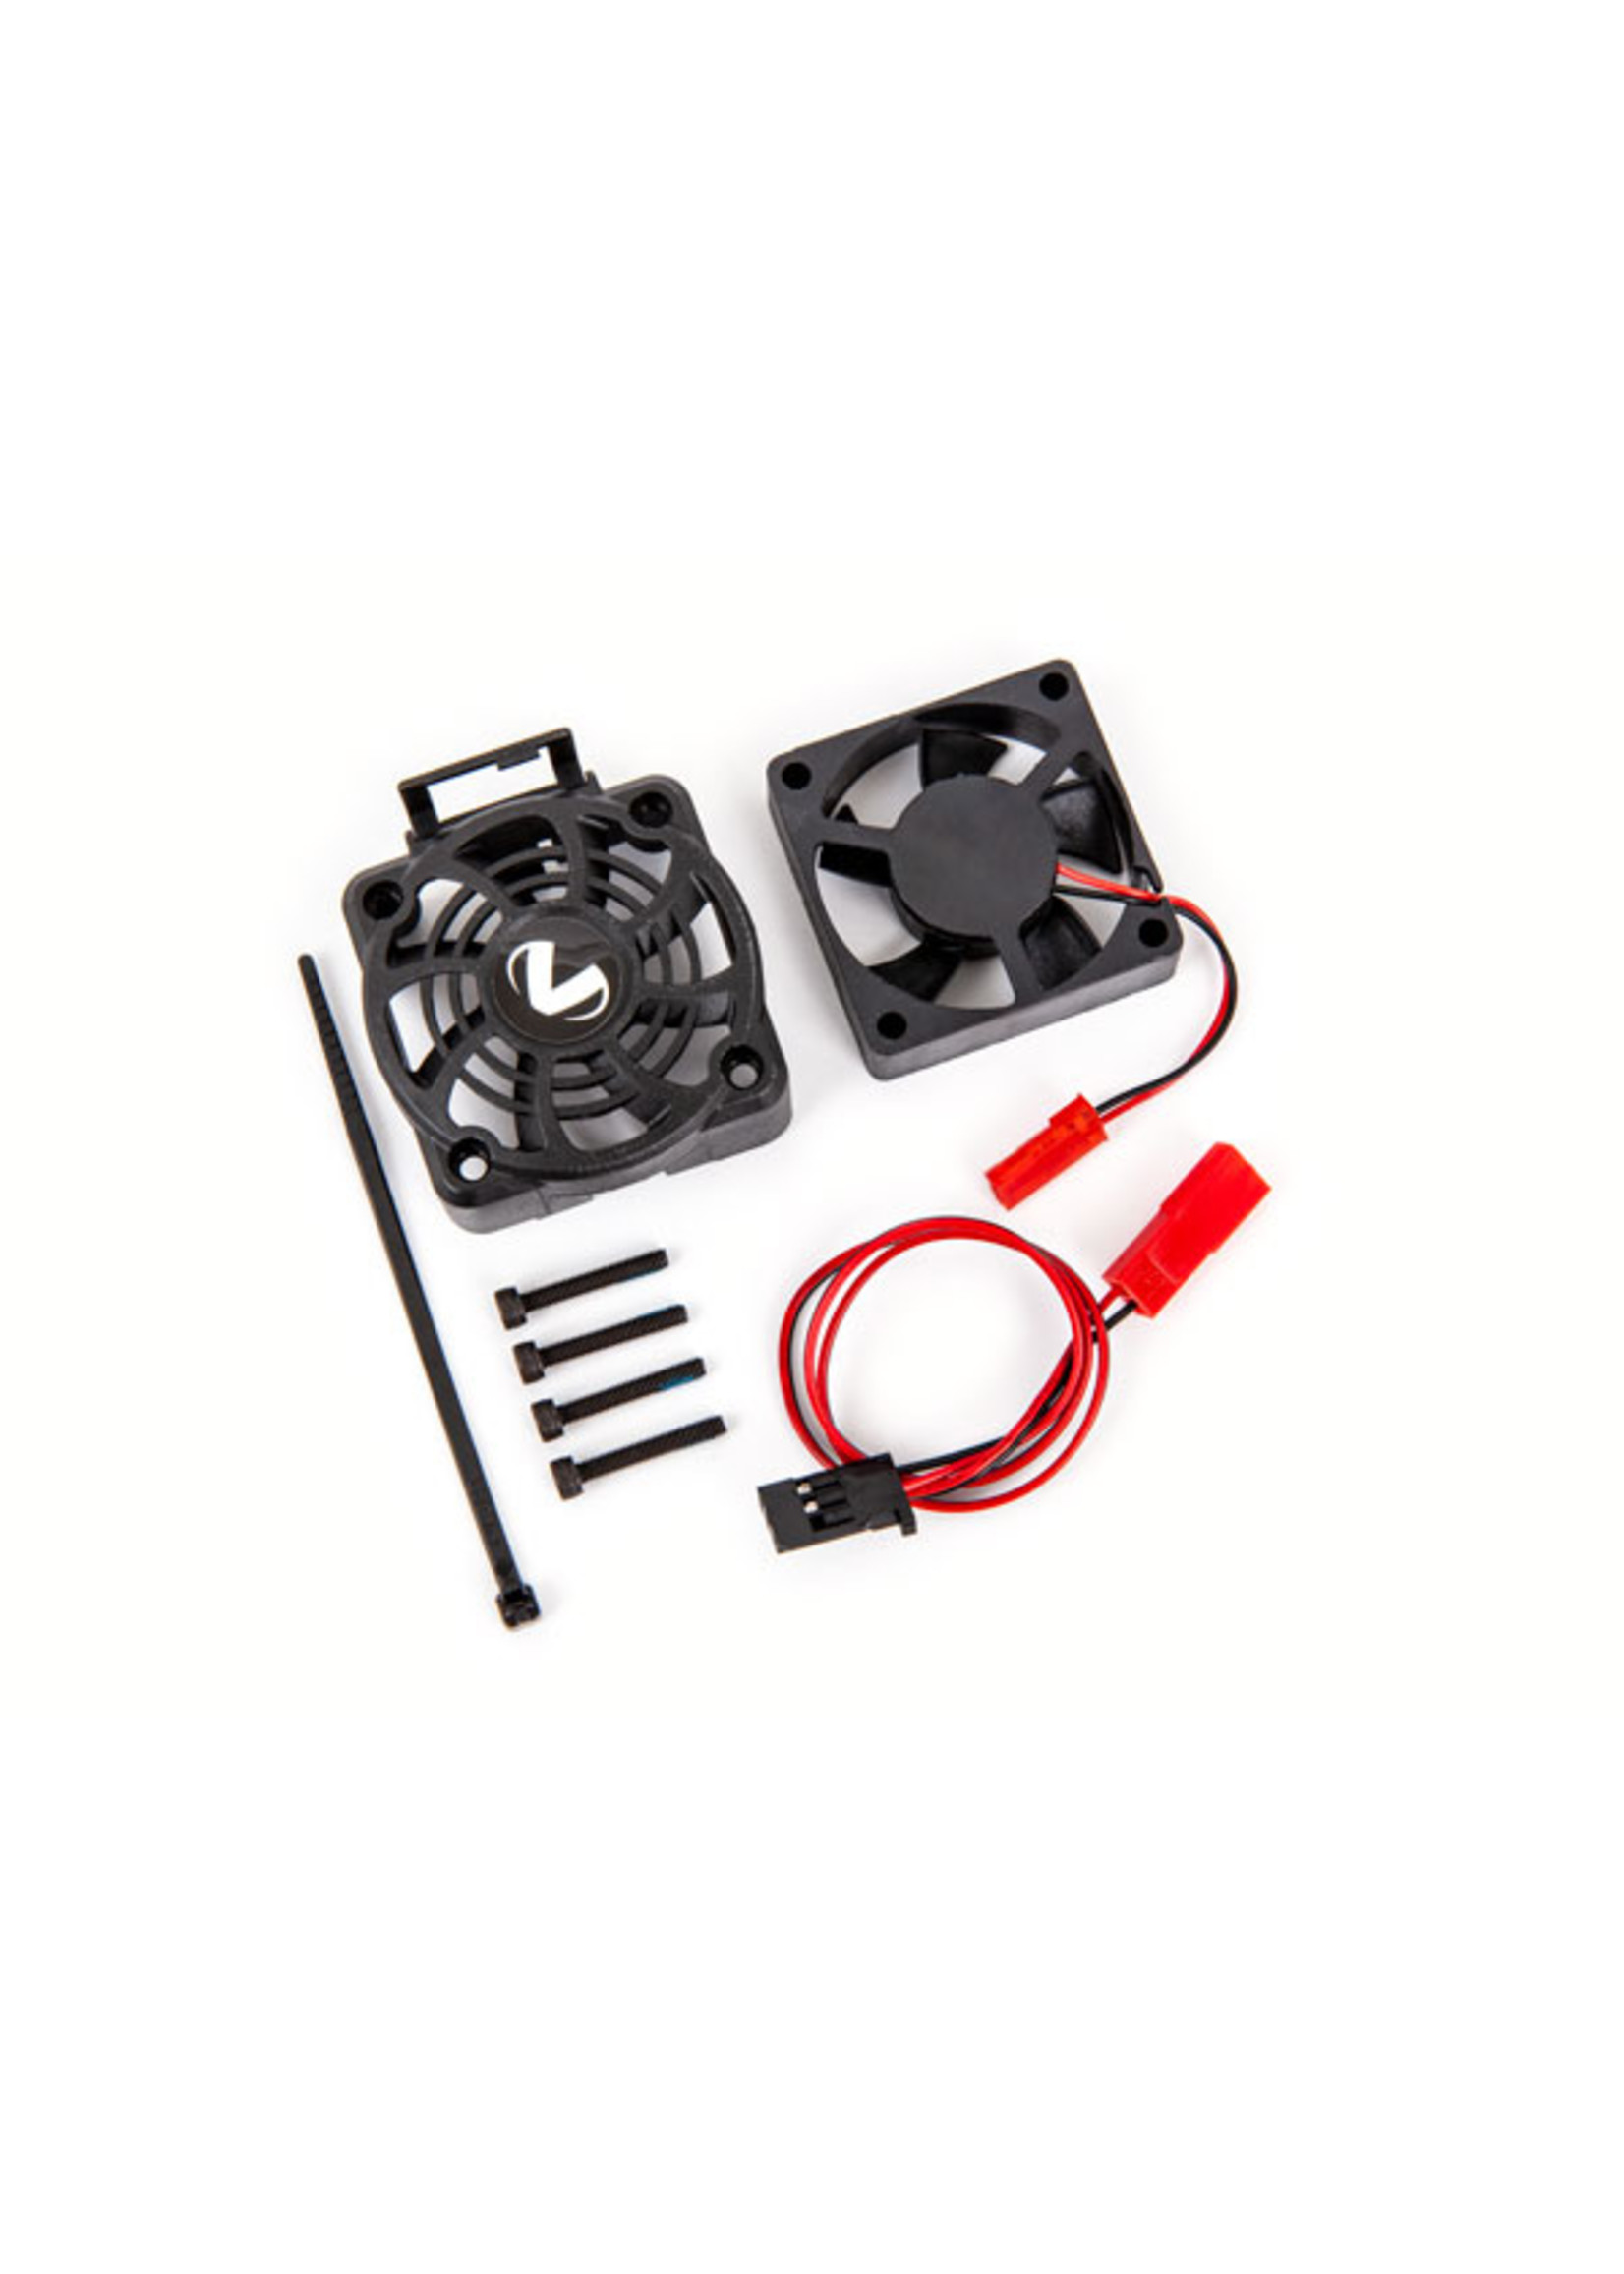 Traxxas 3476 - Cooling Fan Kit (with Shroud) (Fits #3483 Motor)